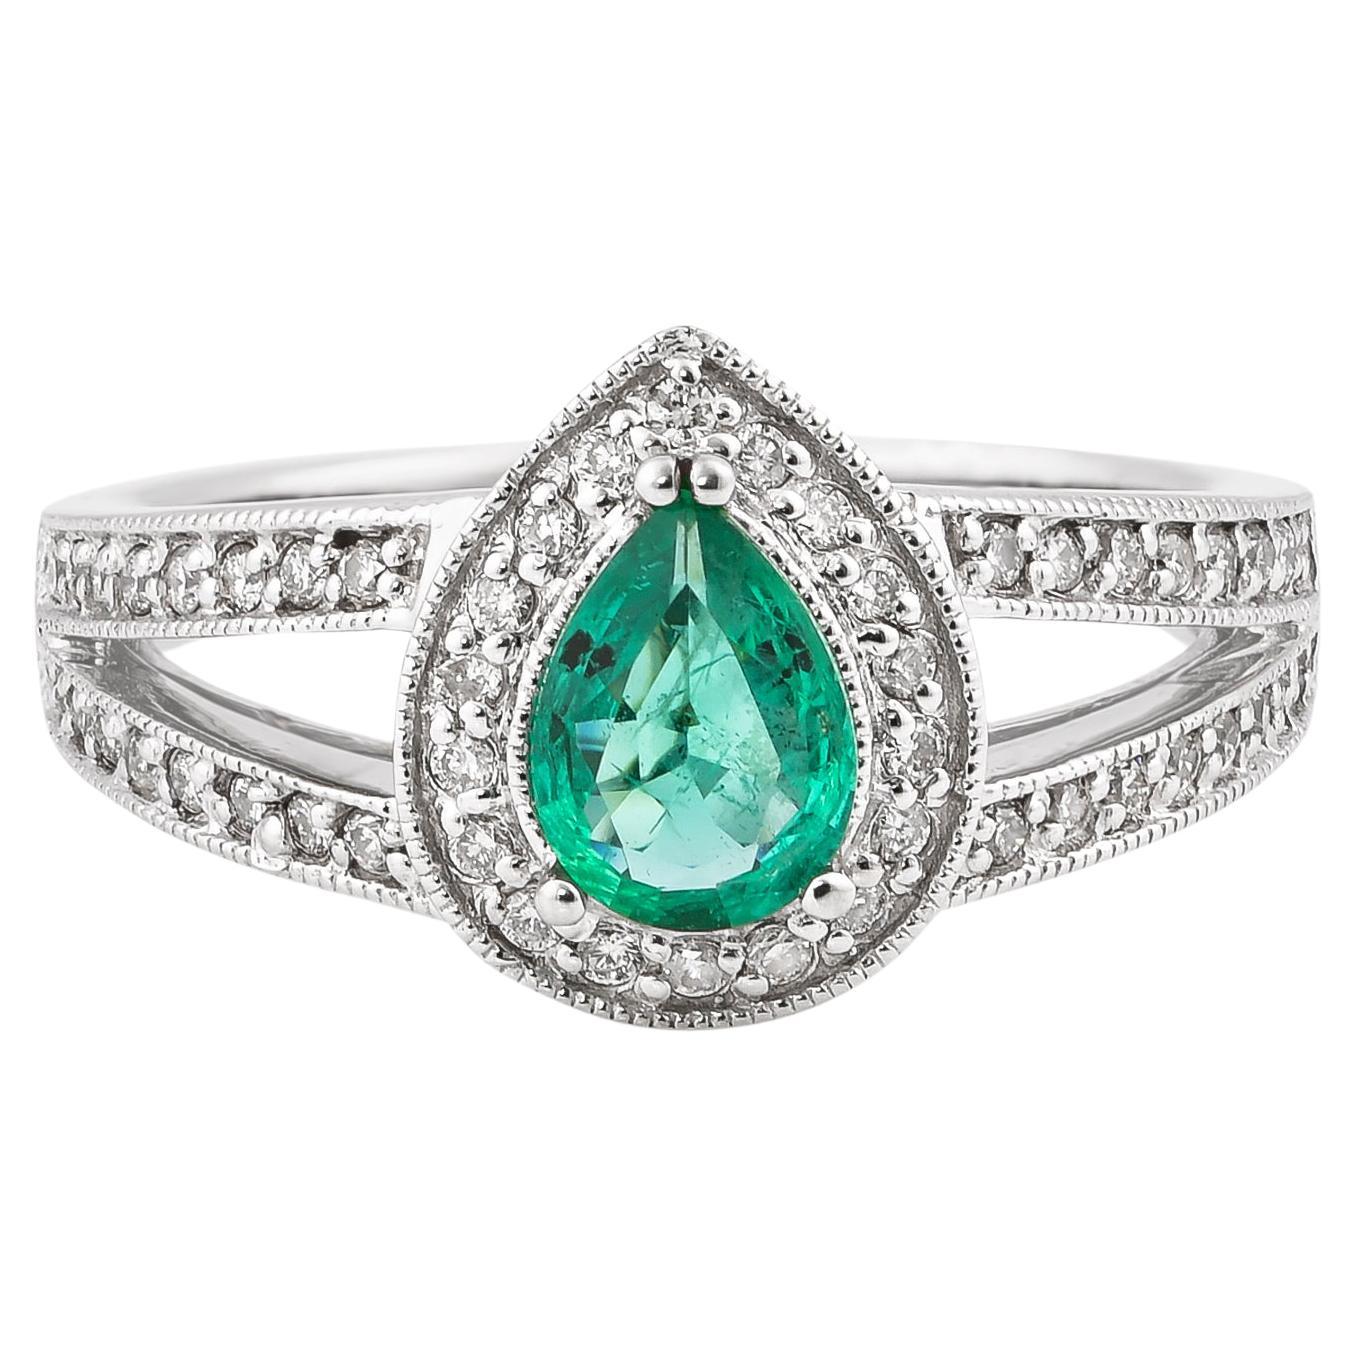 0.53 Carat Emerald and White Diamond Ring in 14 Karat White Gold For Sale